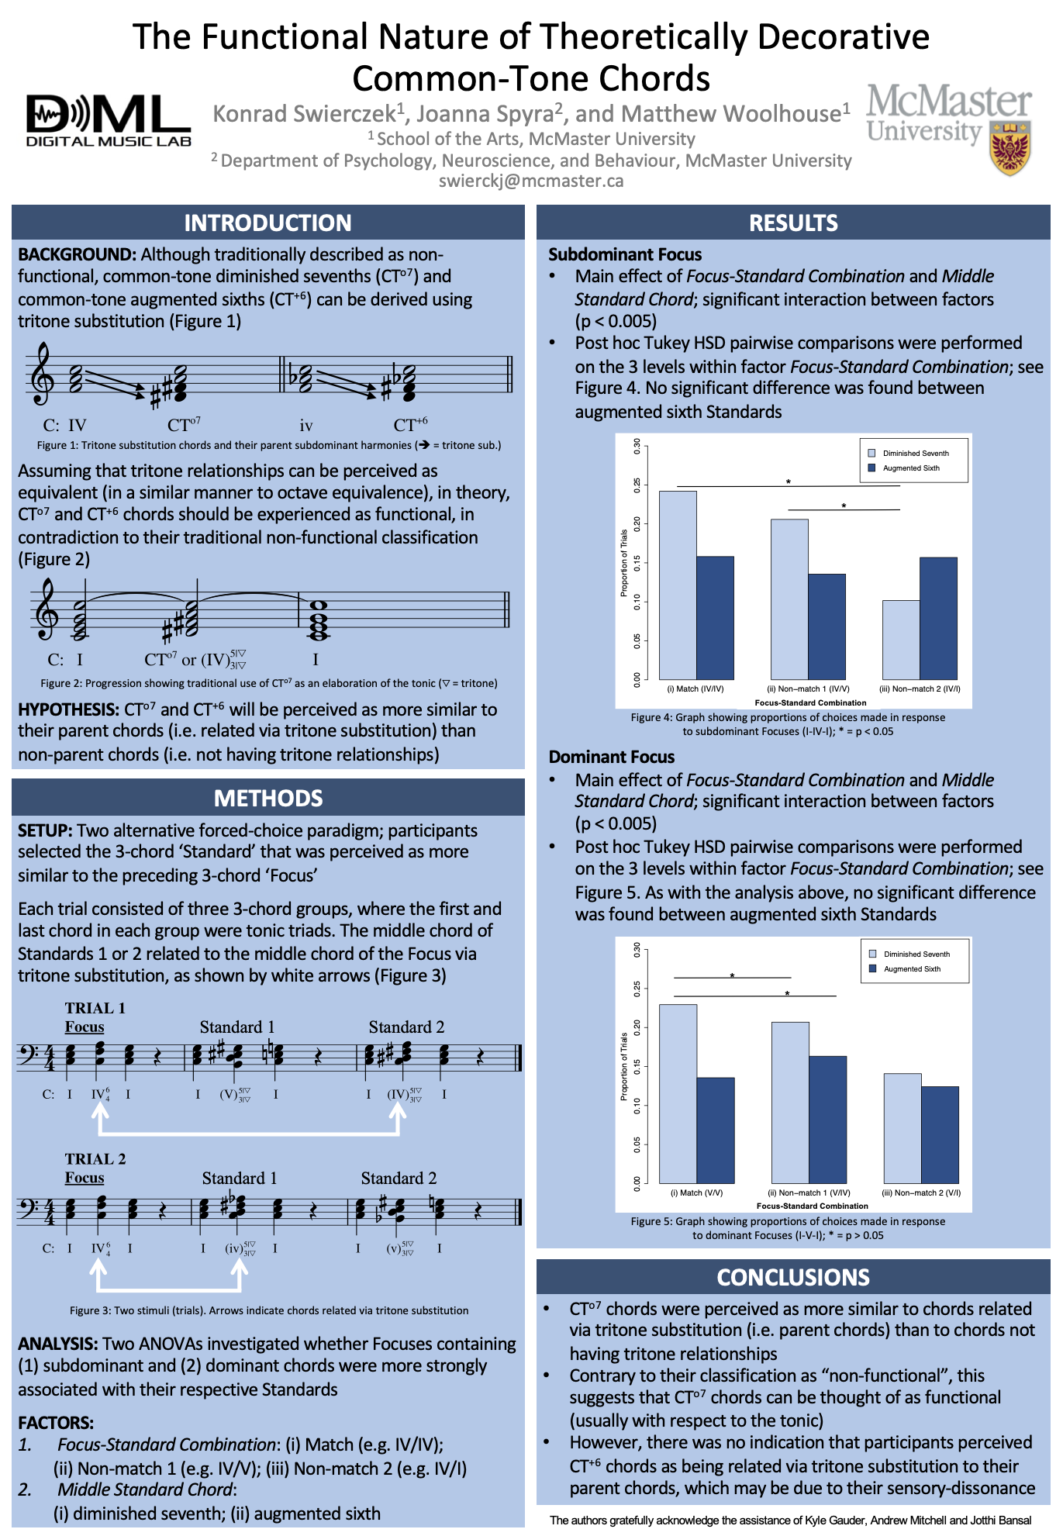 The poster for "The Functional Nature of Theoretically Decorative Common-Tone Chords" by Konrad Swierczek, Joanna Spyra, and Matthew Woolhouse.